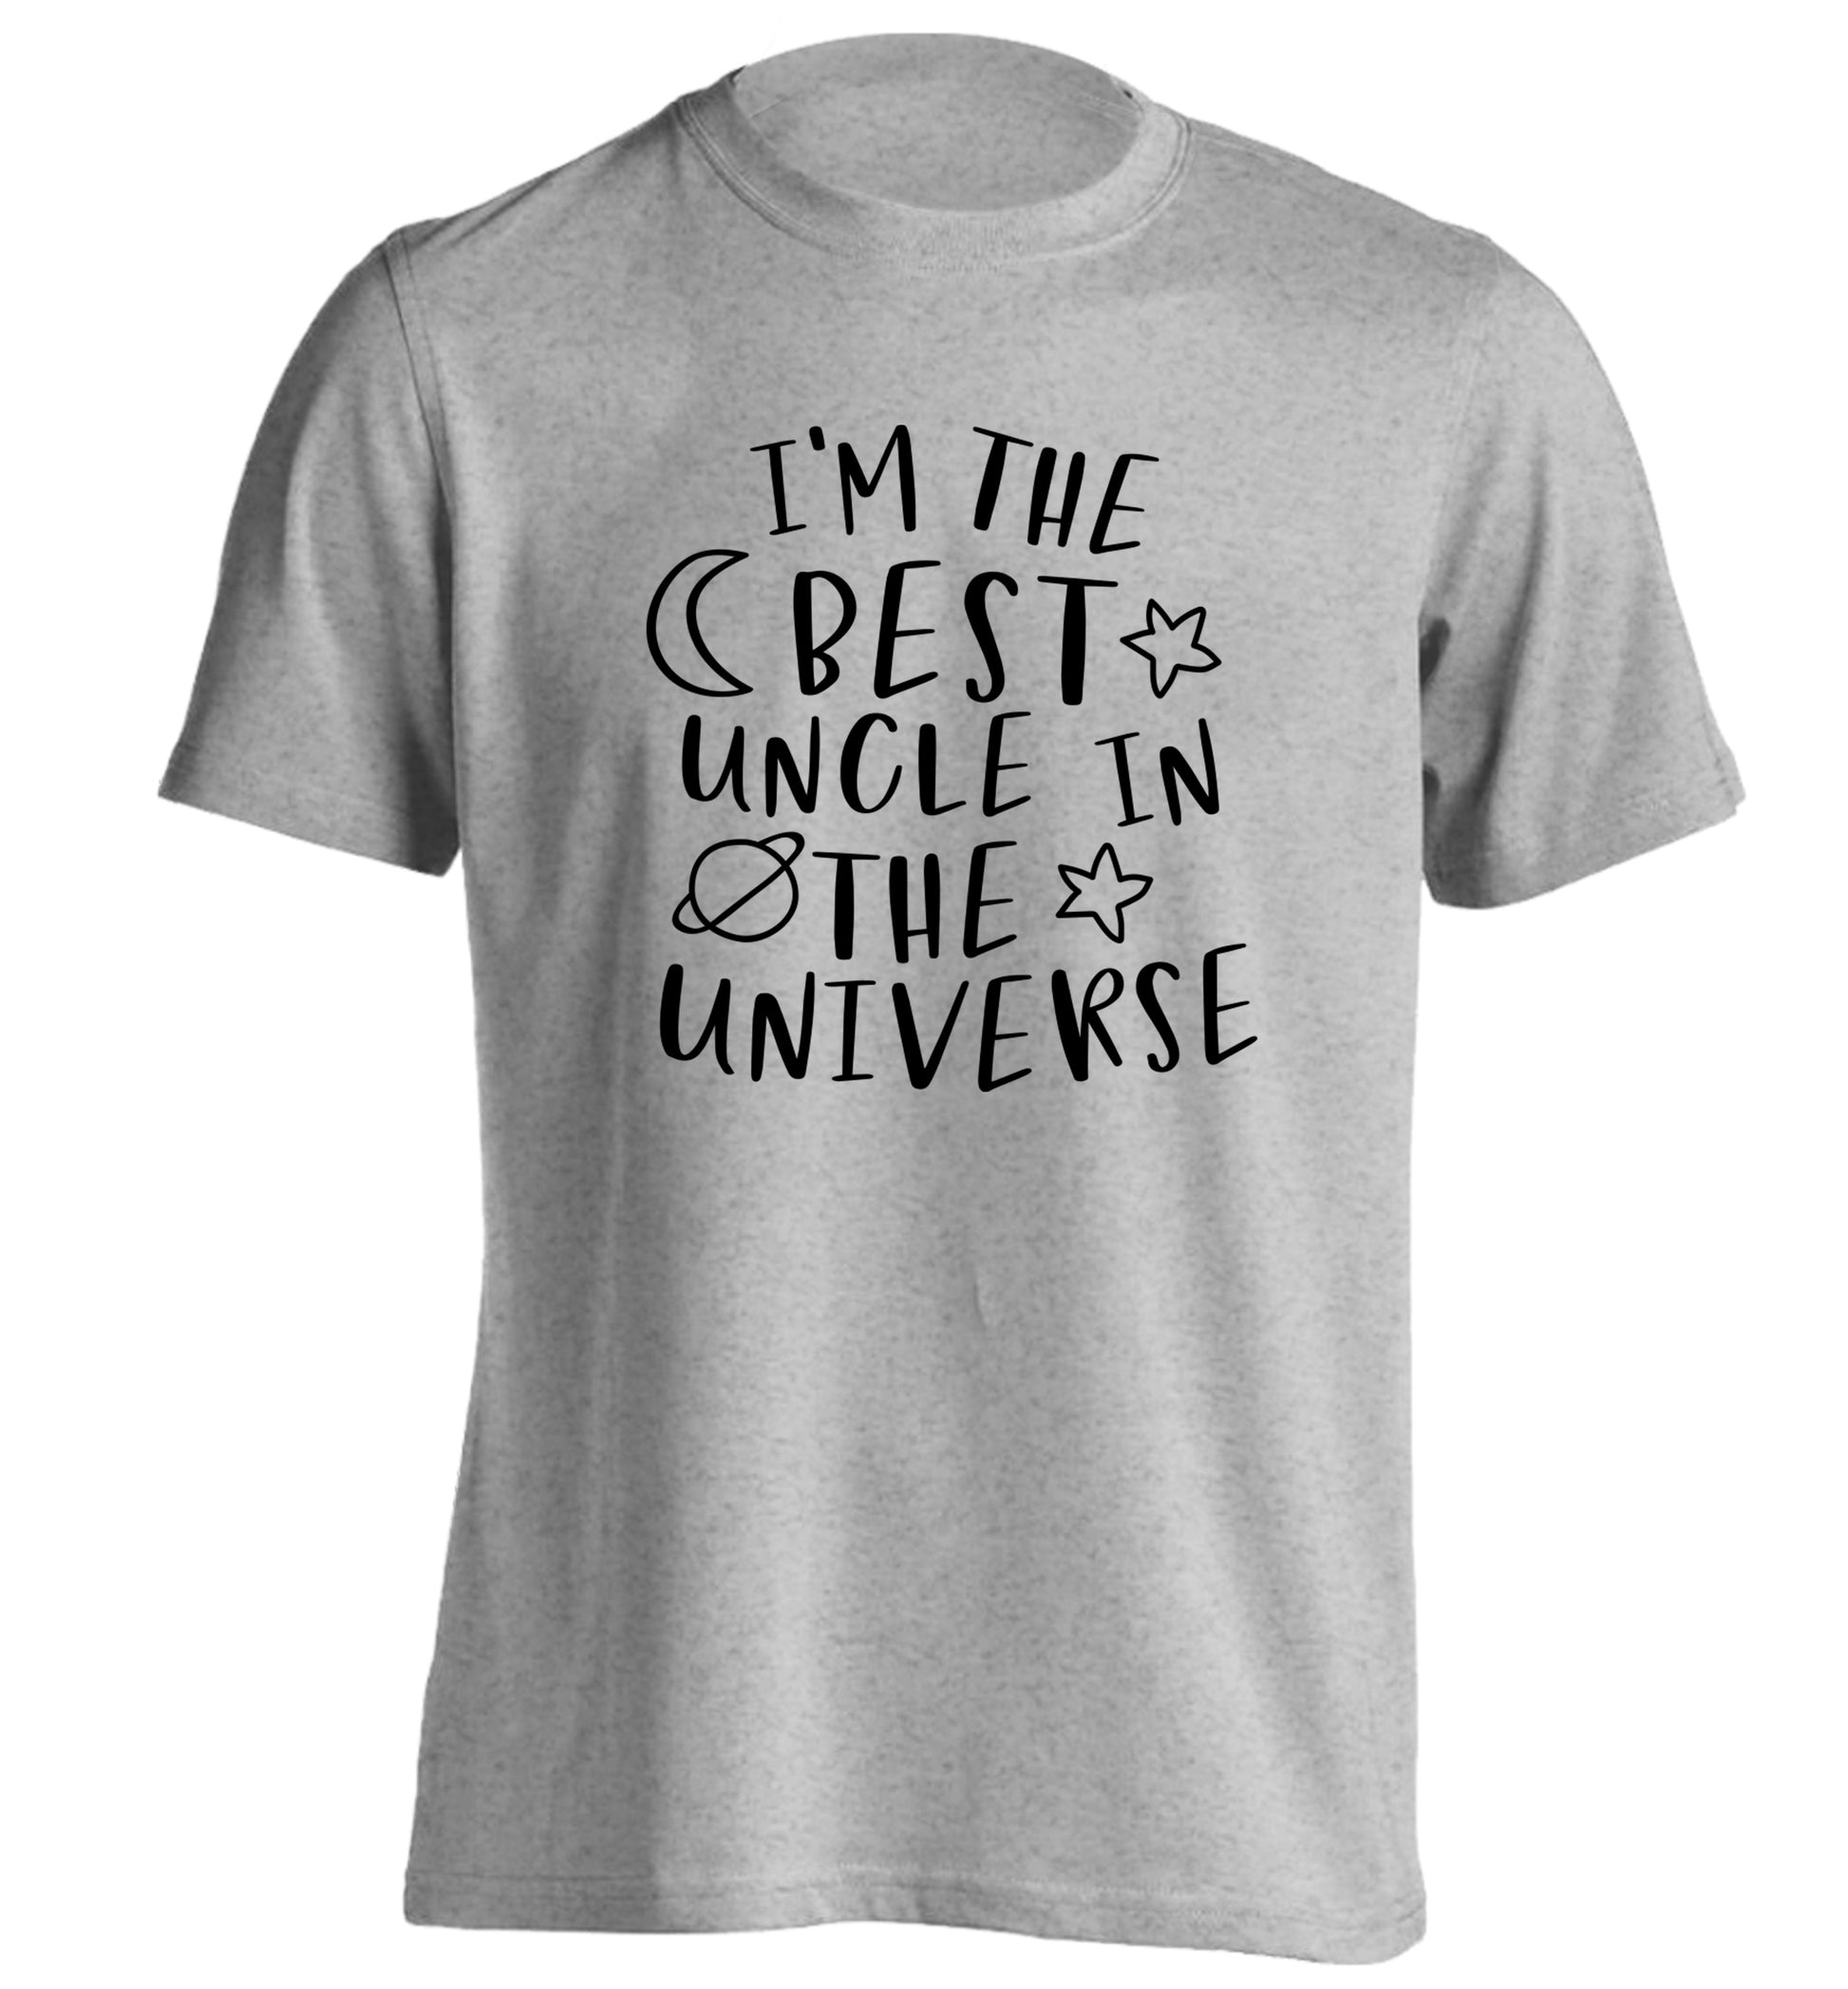 I'm the best uncle in the universe adults unisex grey Tshirt 2XL